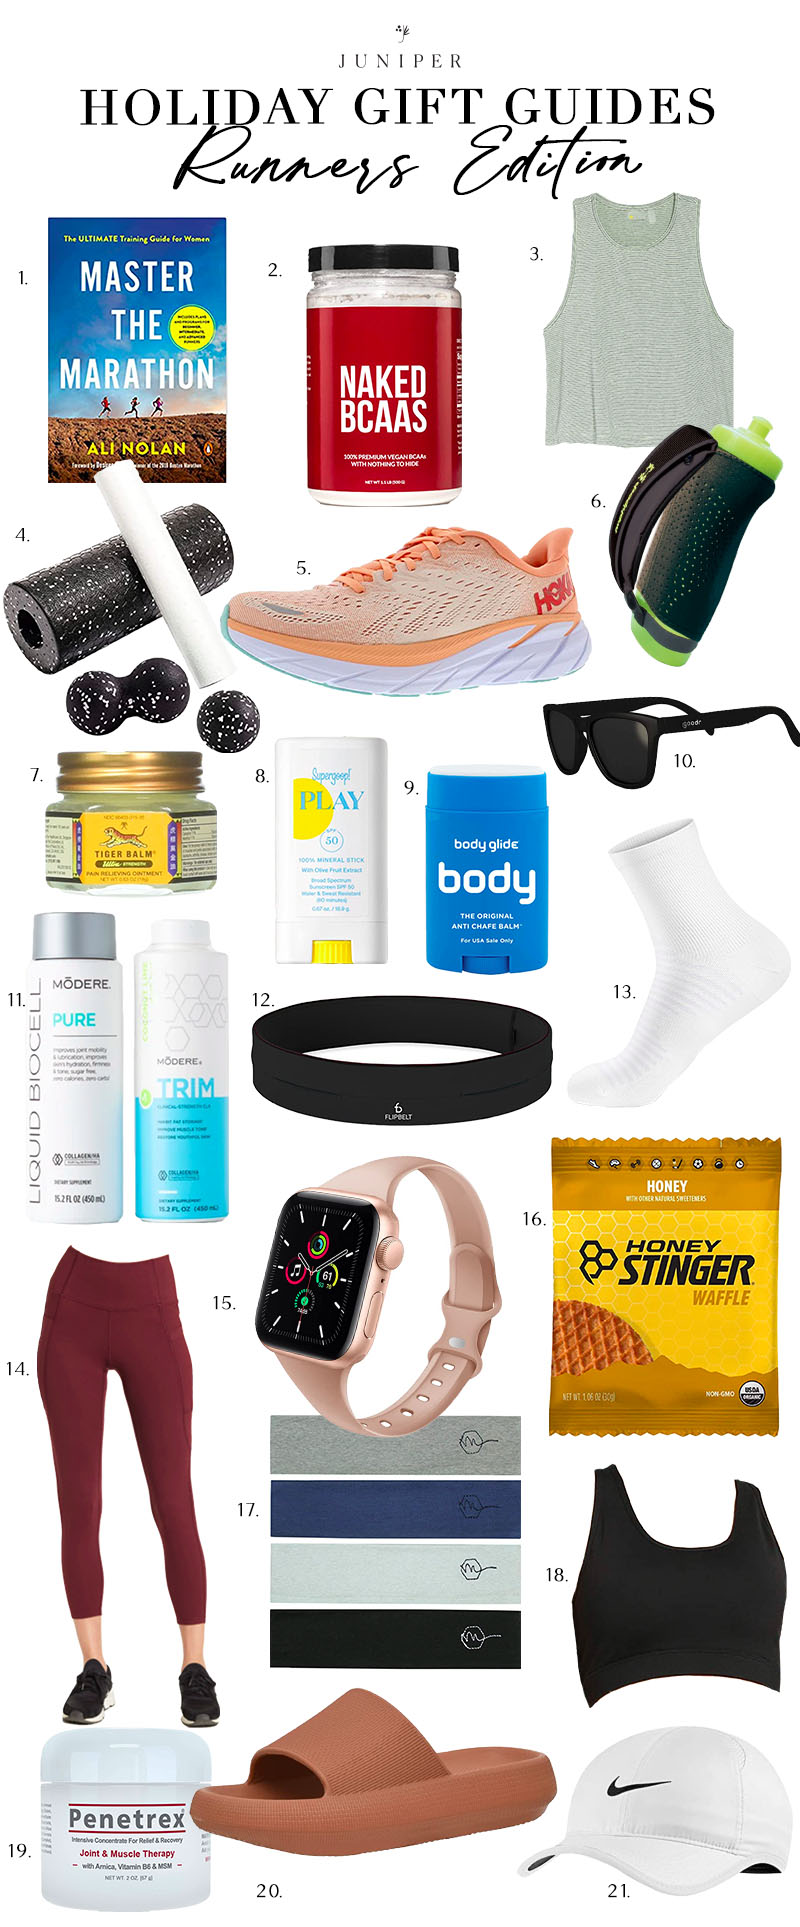 gift guide for him fitness edition.001